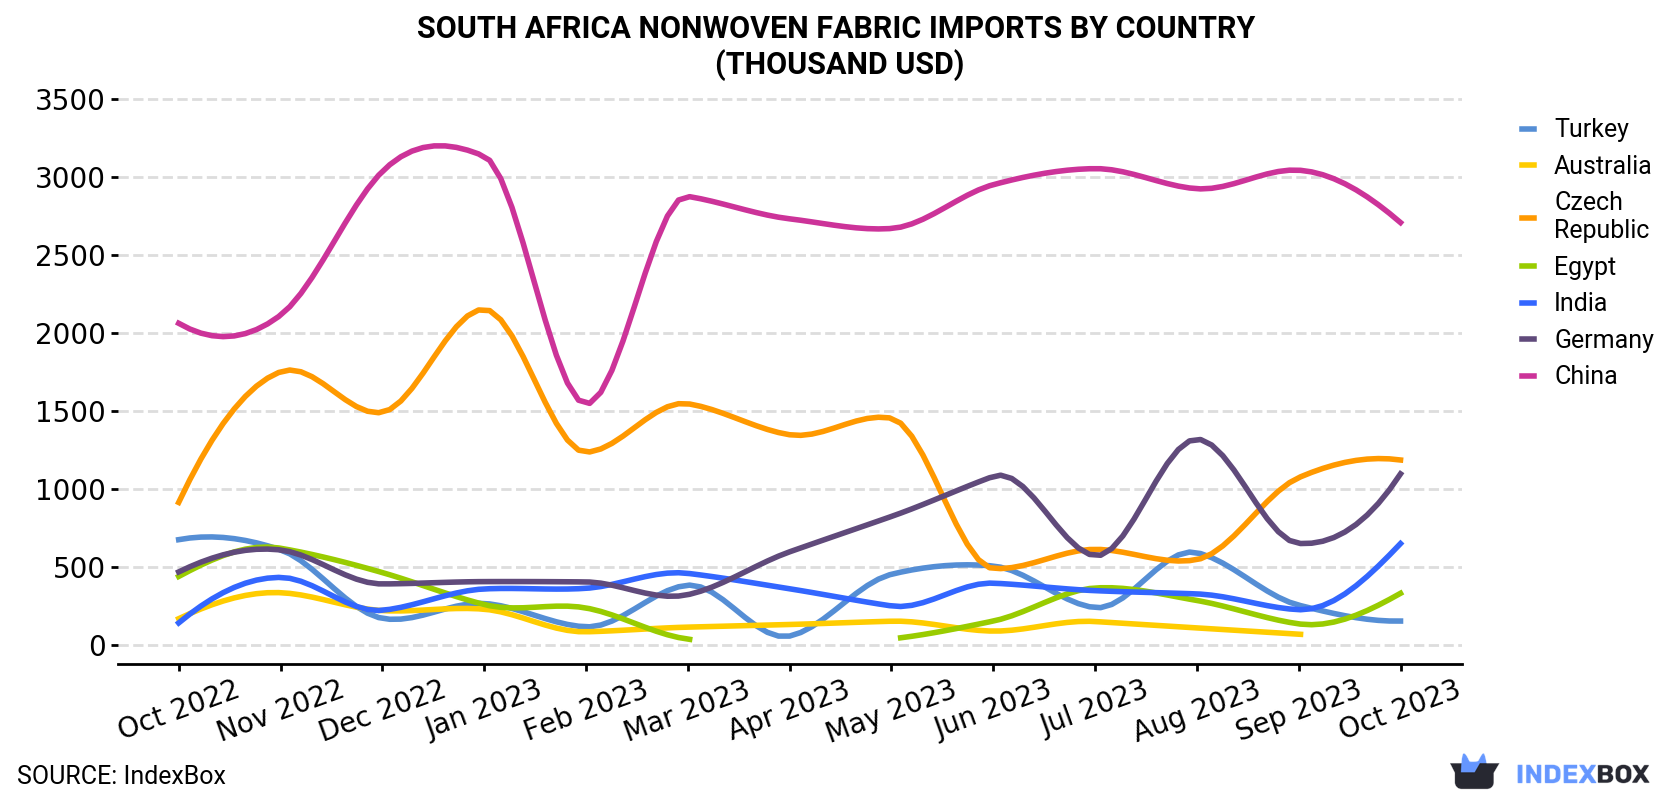 South Africa Nonwoven Fabric Imports By Country (Thousand USD)